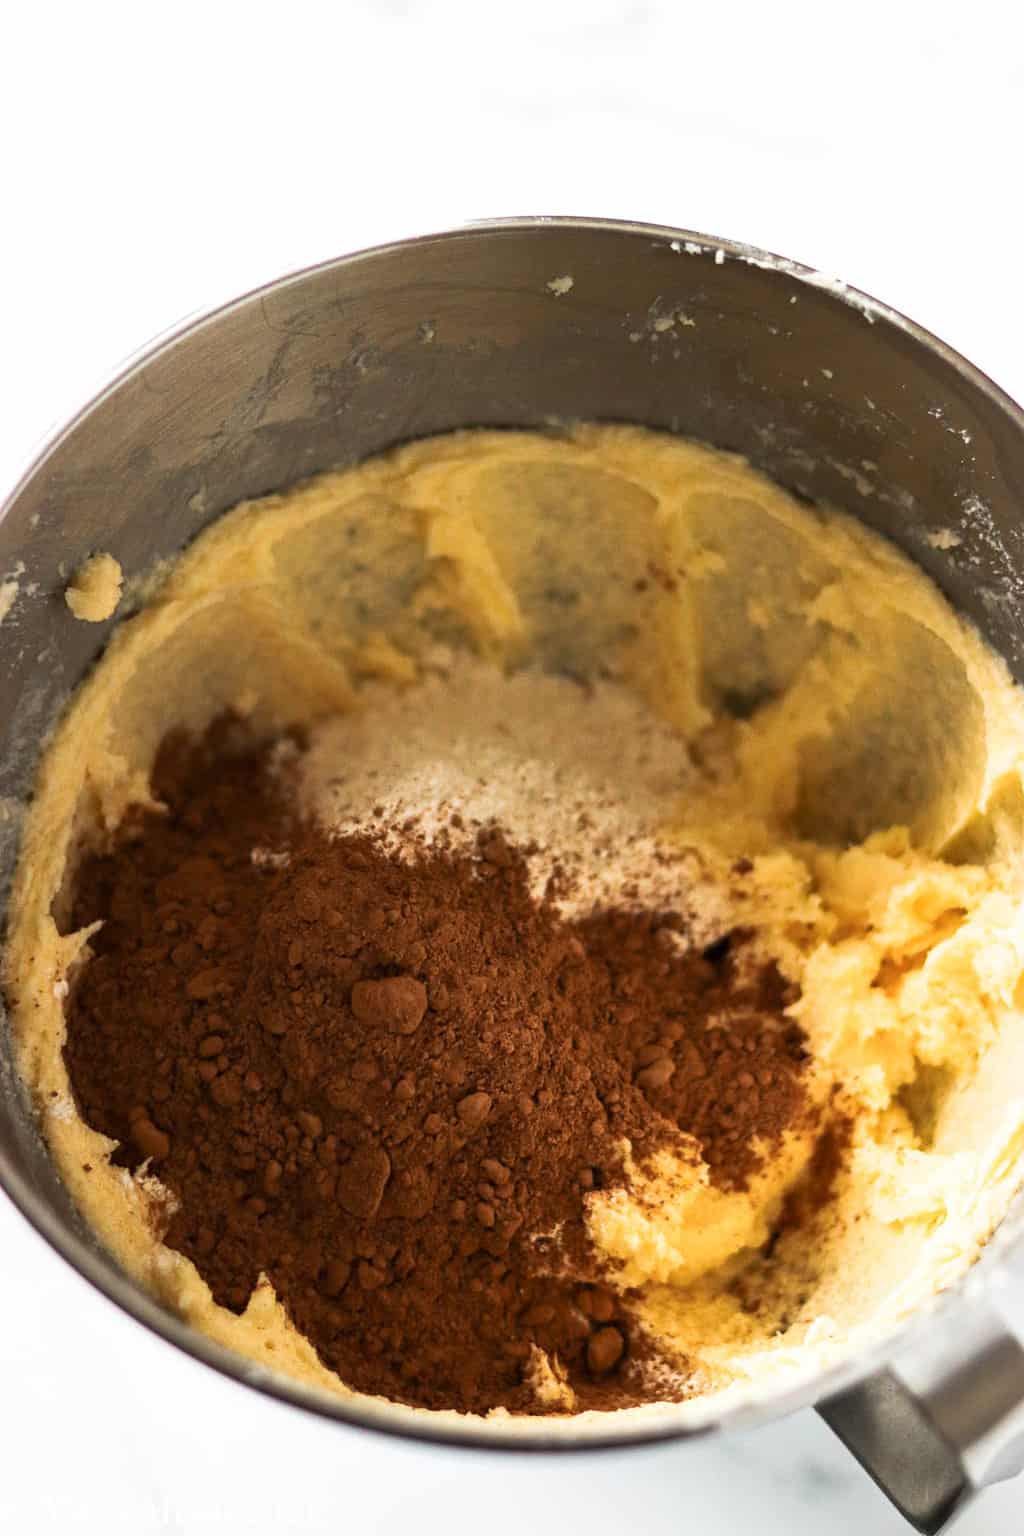 A mixing bowl full of creamed butter and cocoa flour mixture